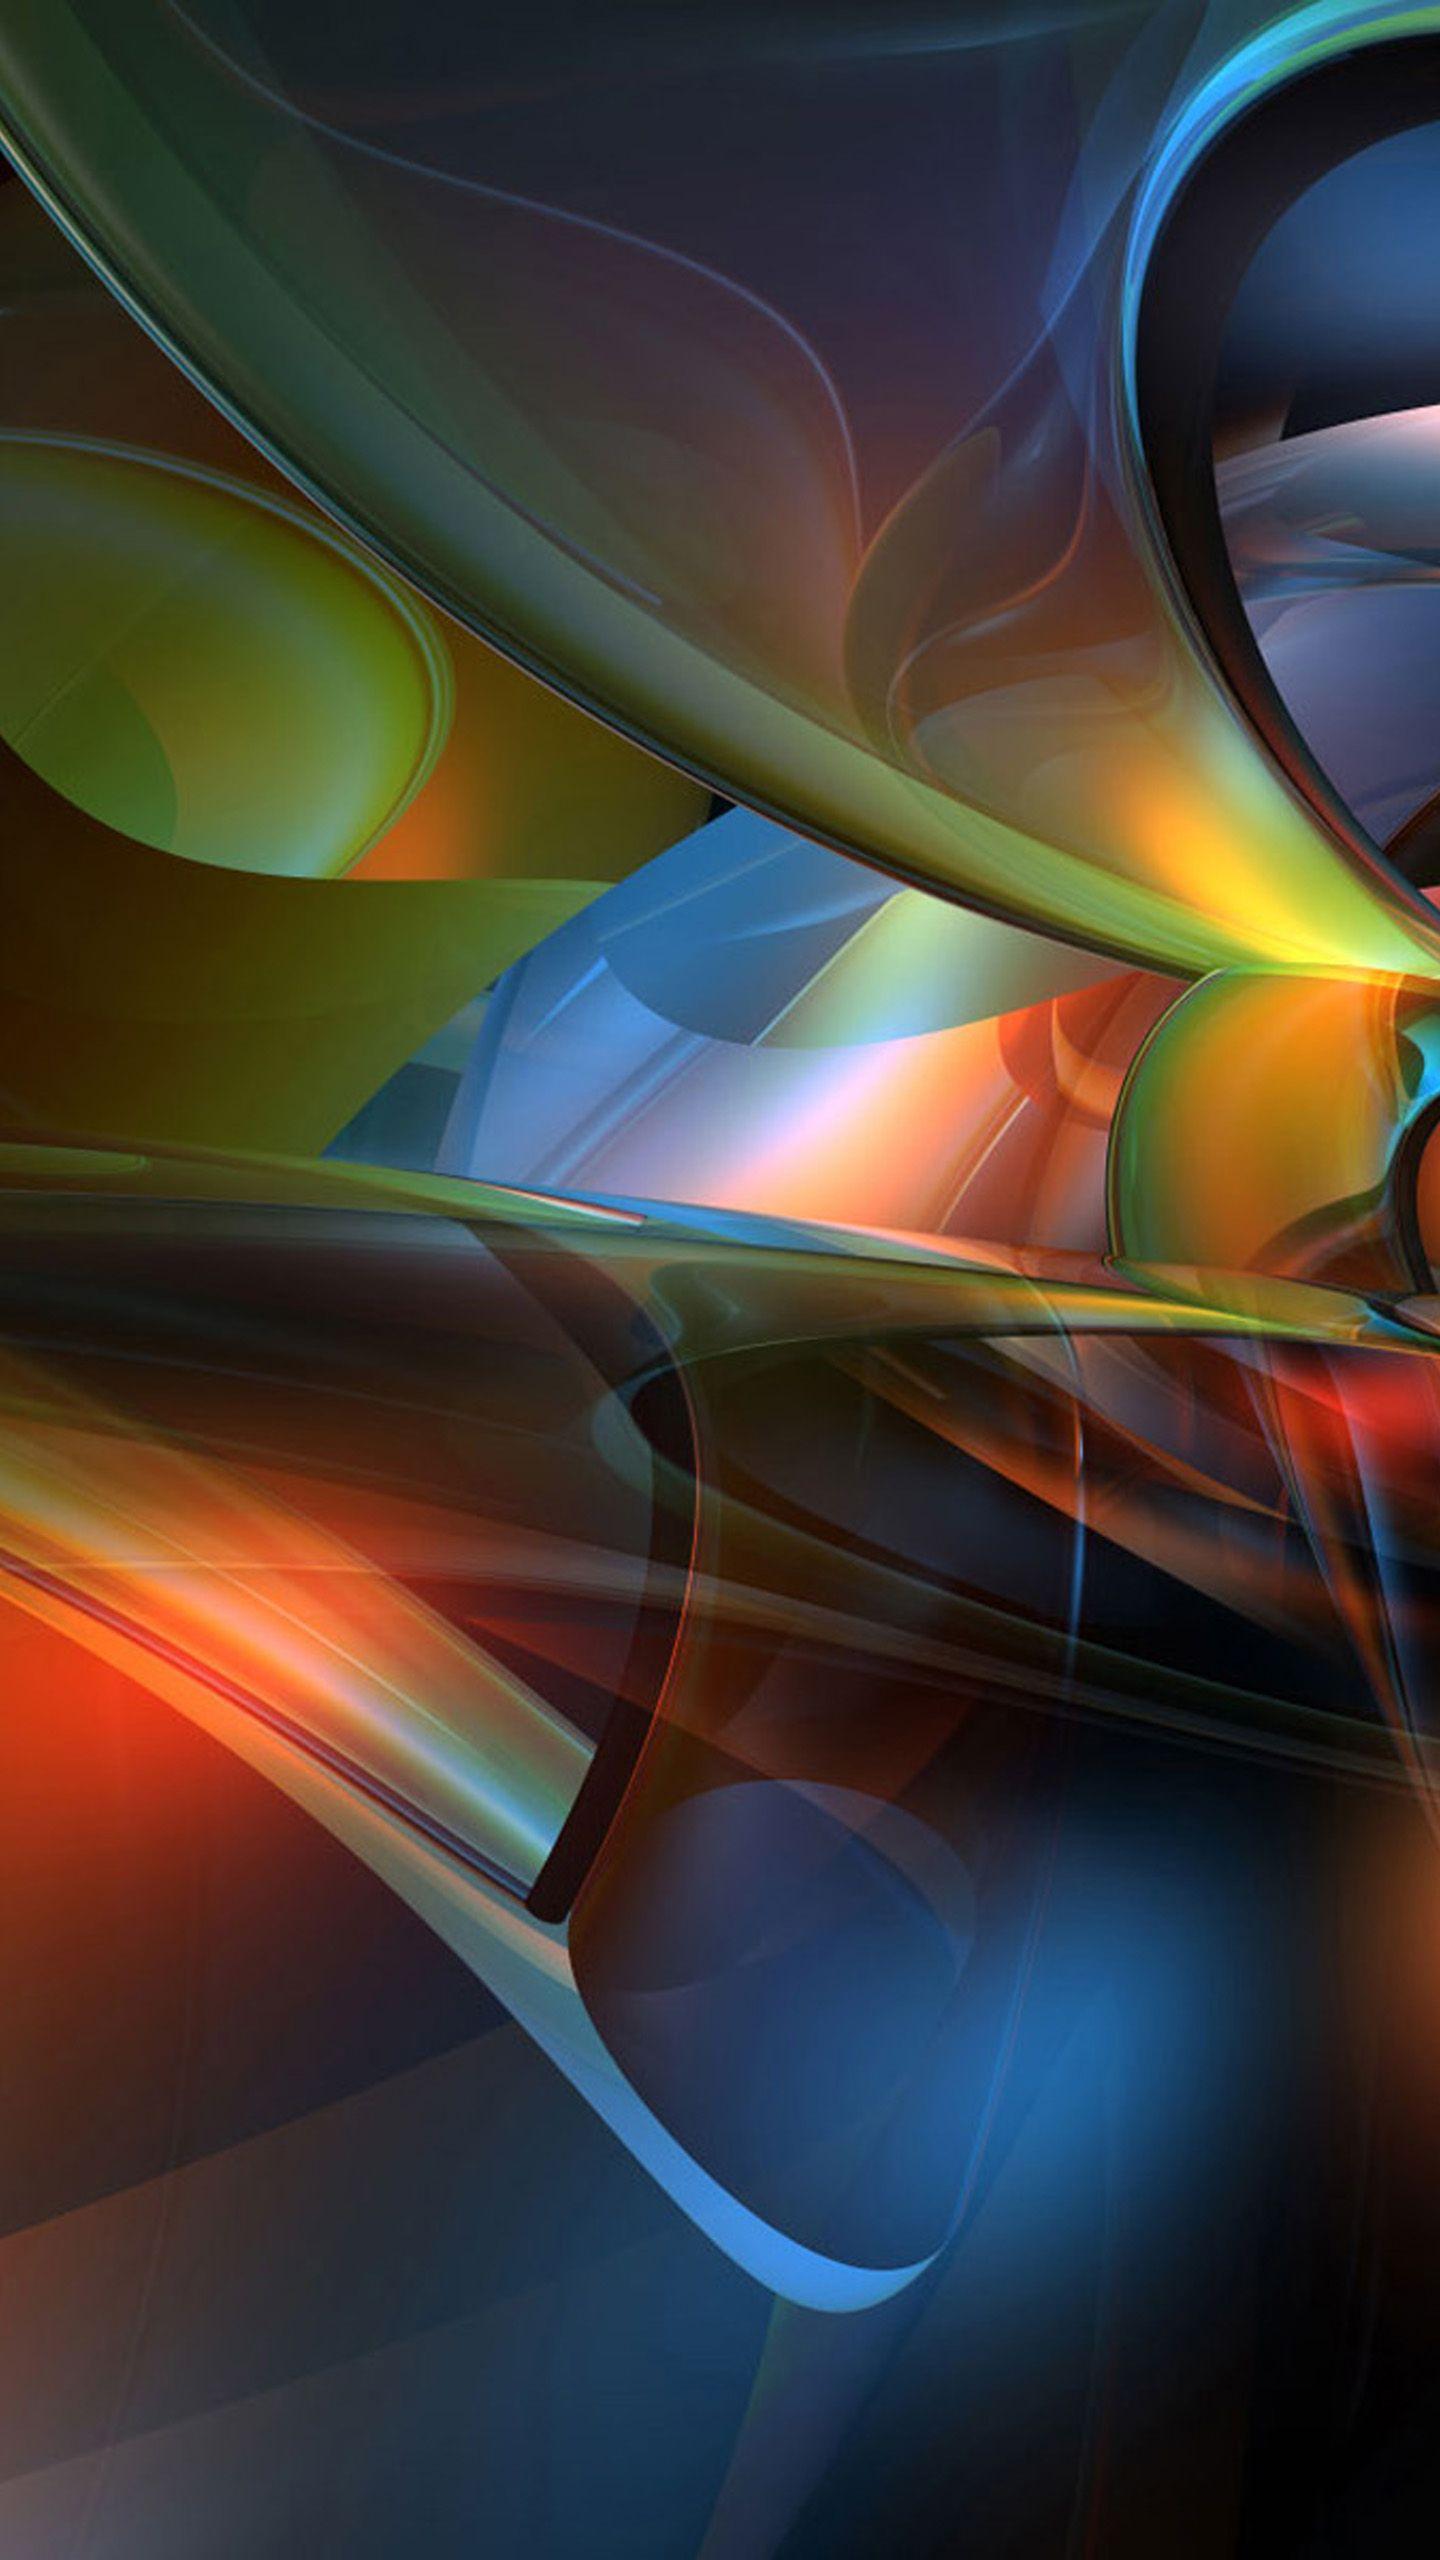 3D Abstract Mobile Phone Wallpaper Mobile